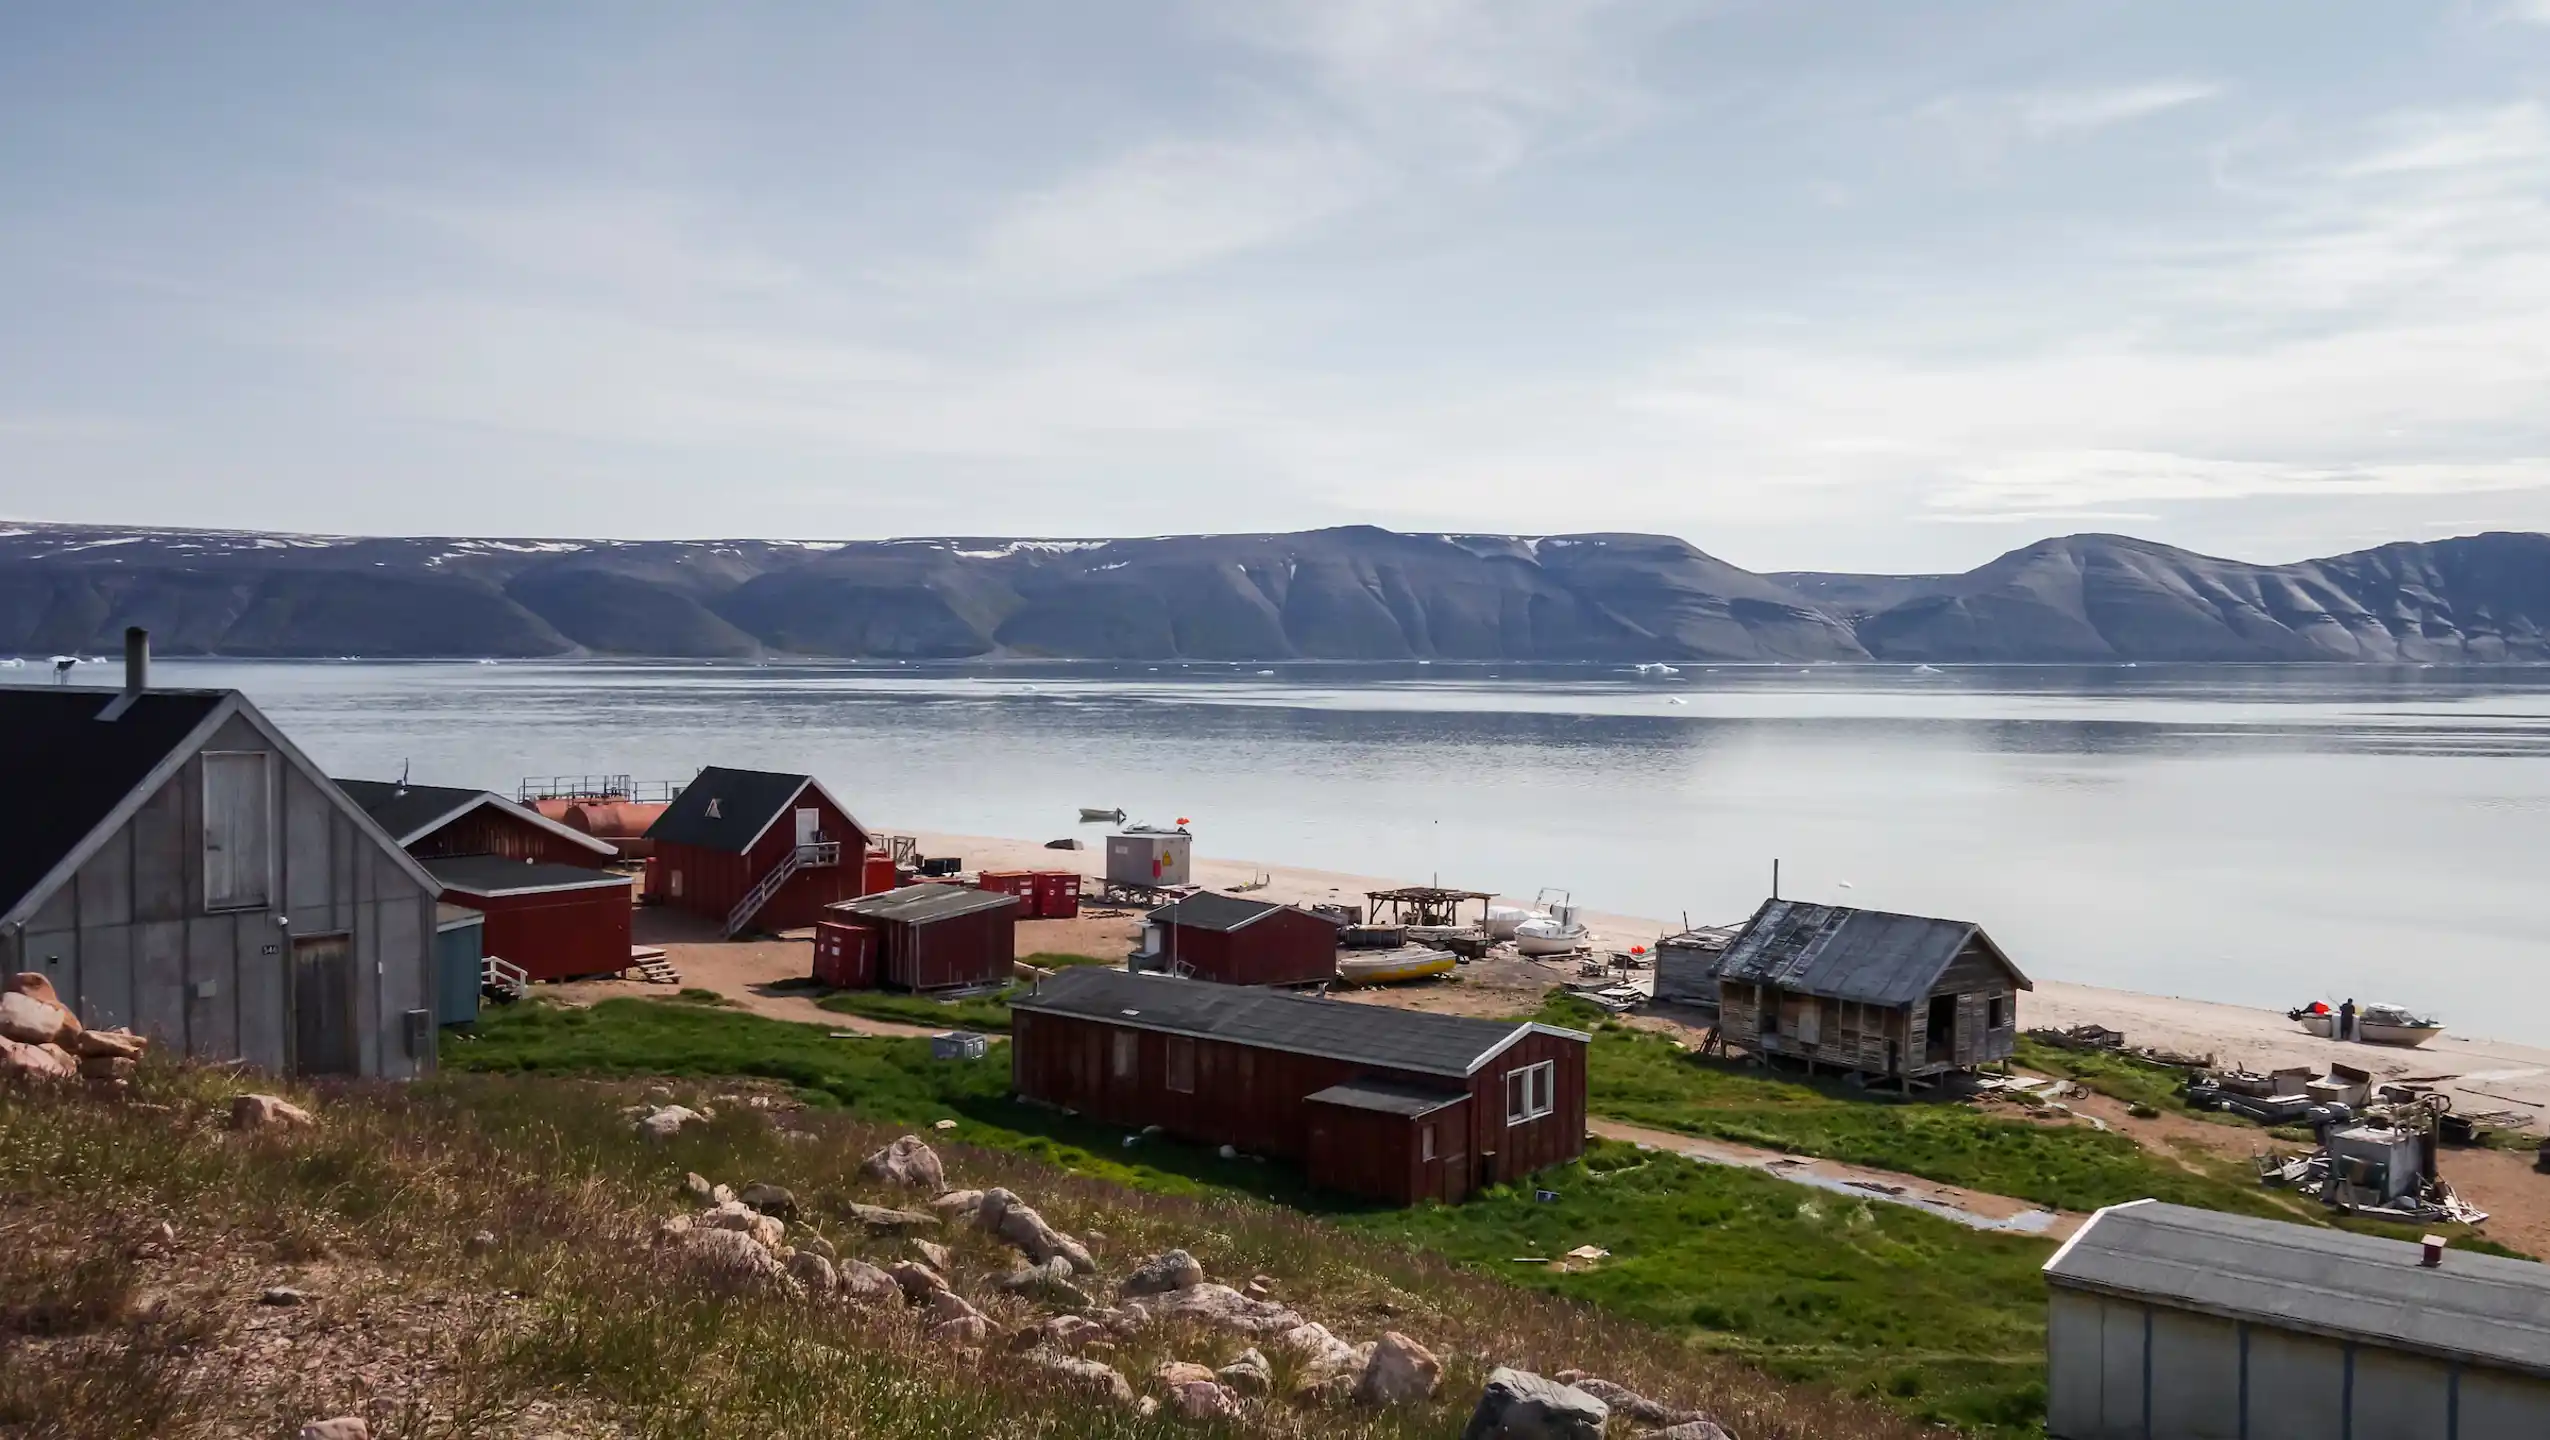 Peaceful Siorapaluk In Sunny Afternoon In Summer Time. Photo By Kim Insuk Visit Greenland